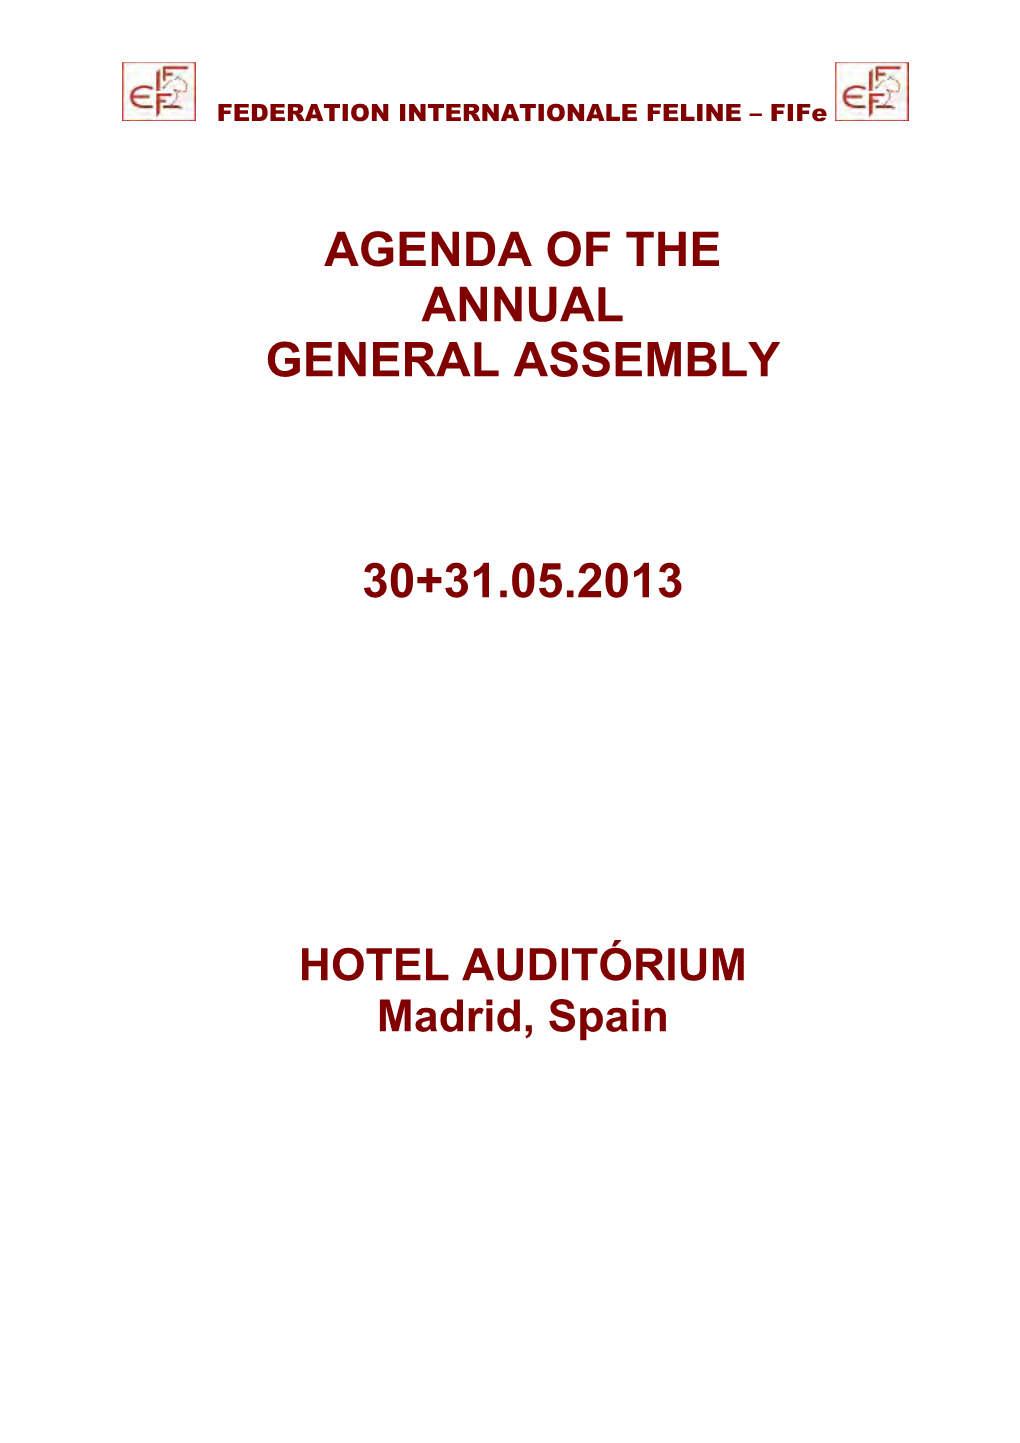 Agenda of the Annual General Assembly 30+31.05.2013